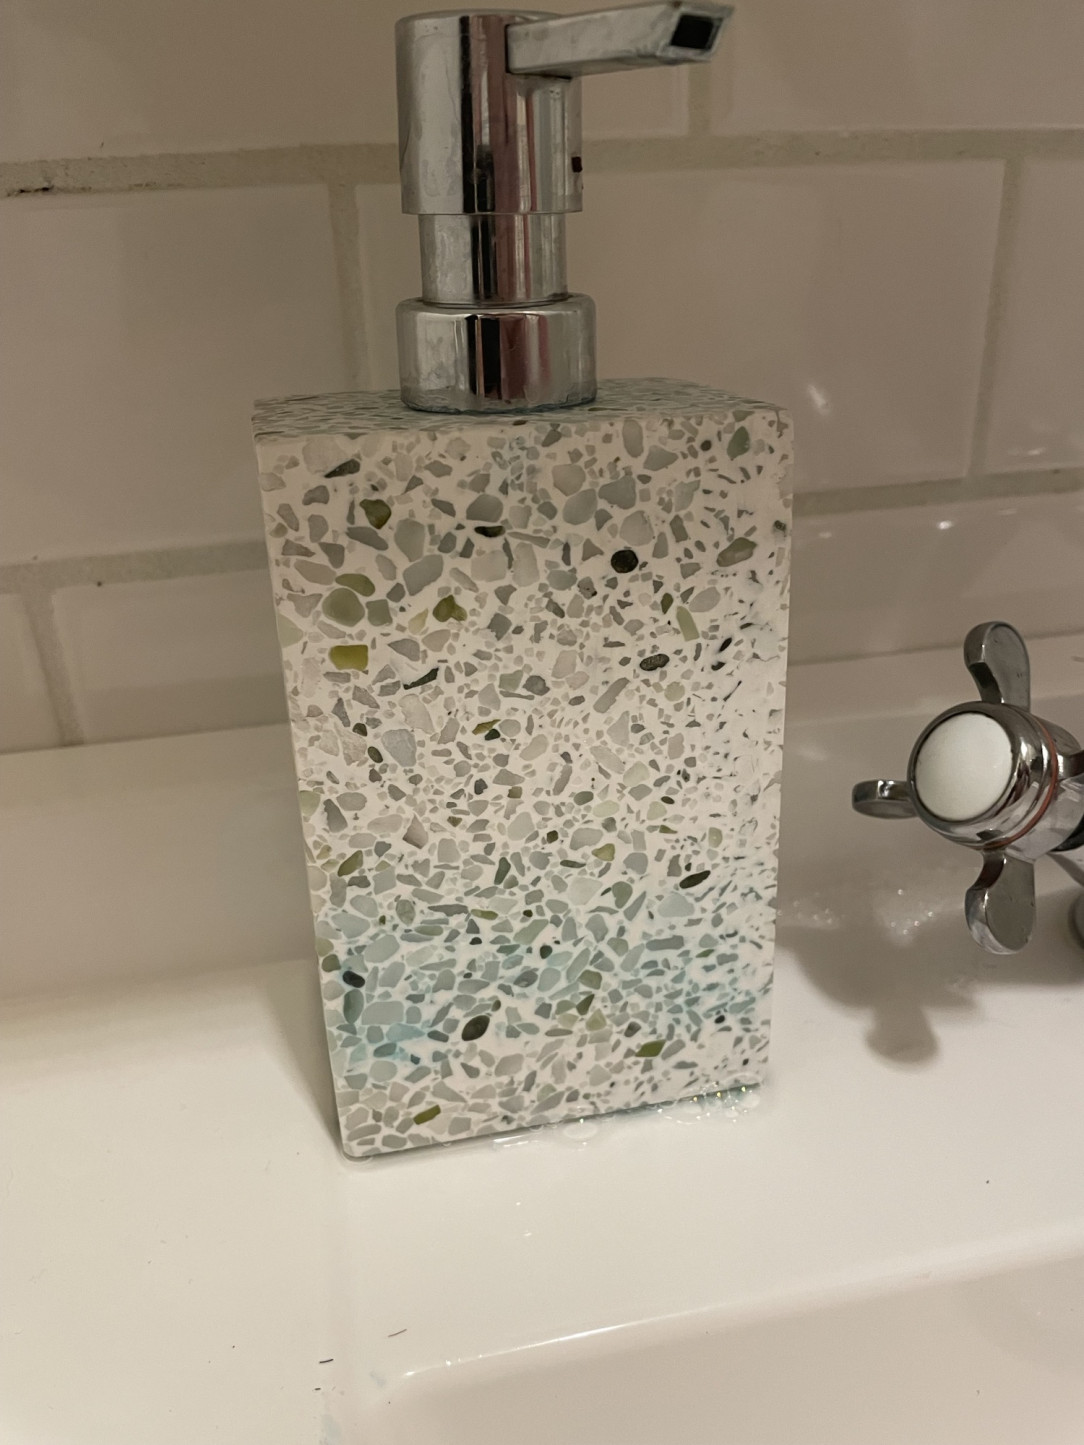 The soap dispenser we recently bought is porous and sweats soap